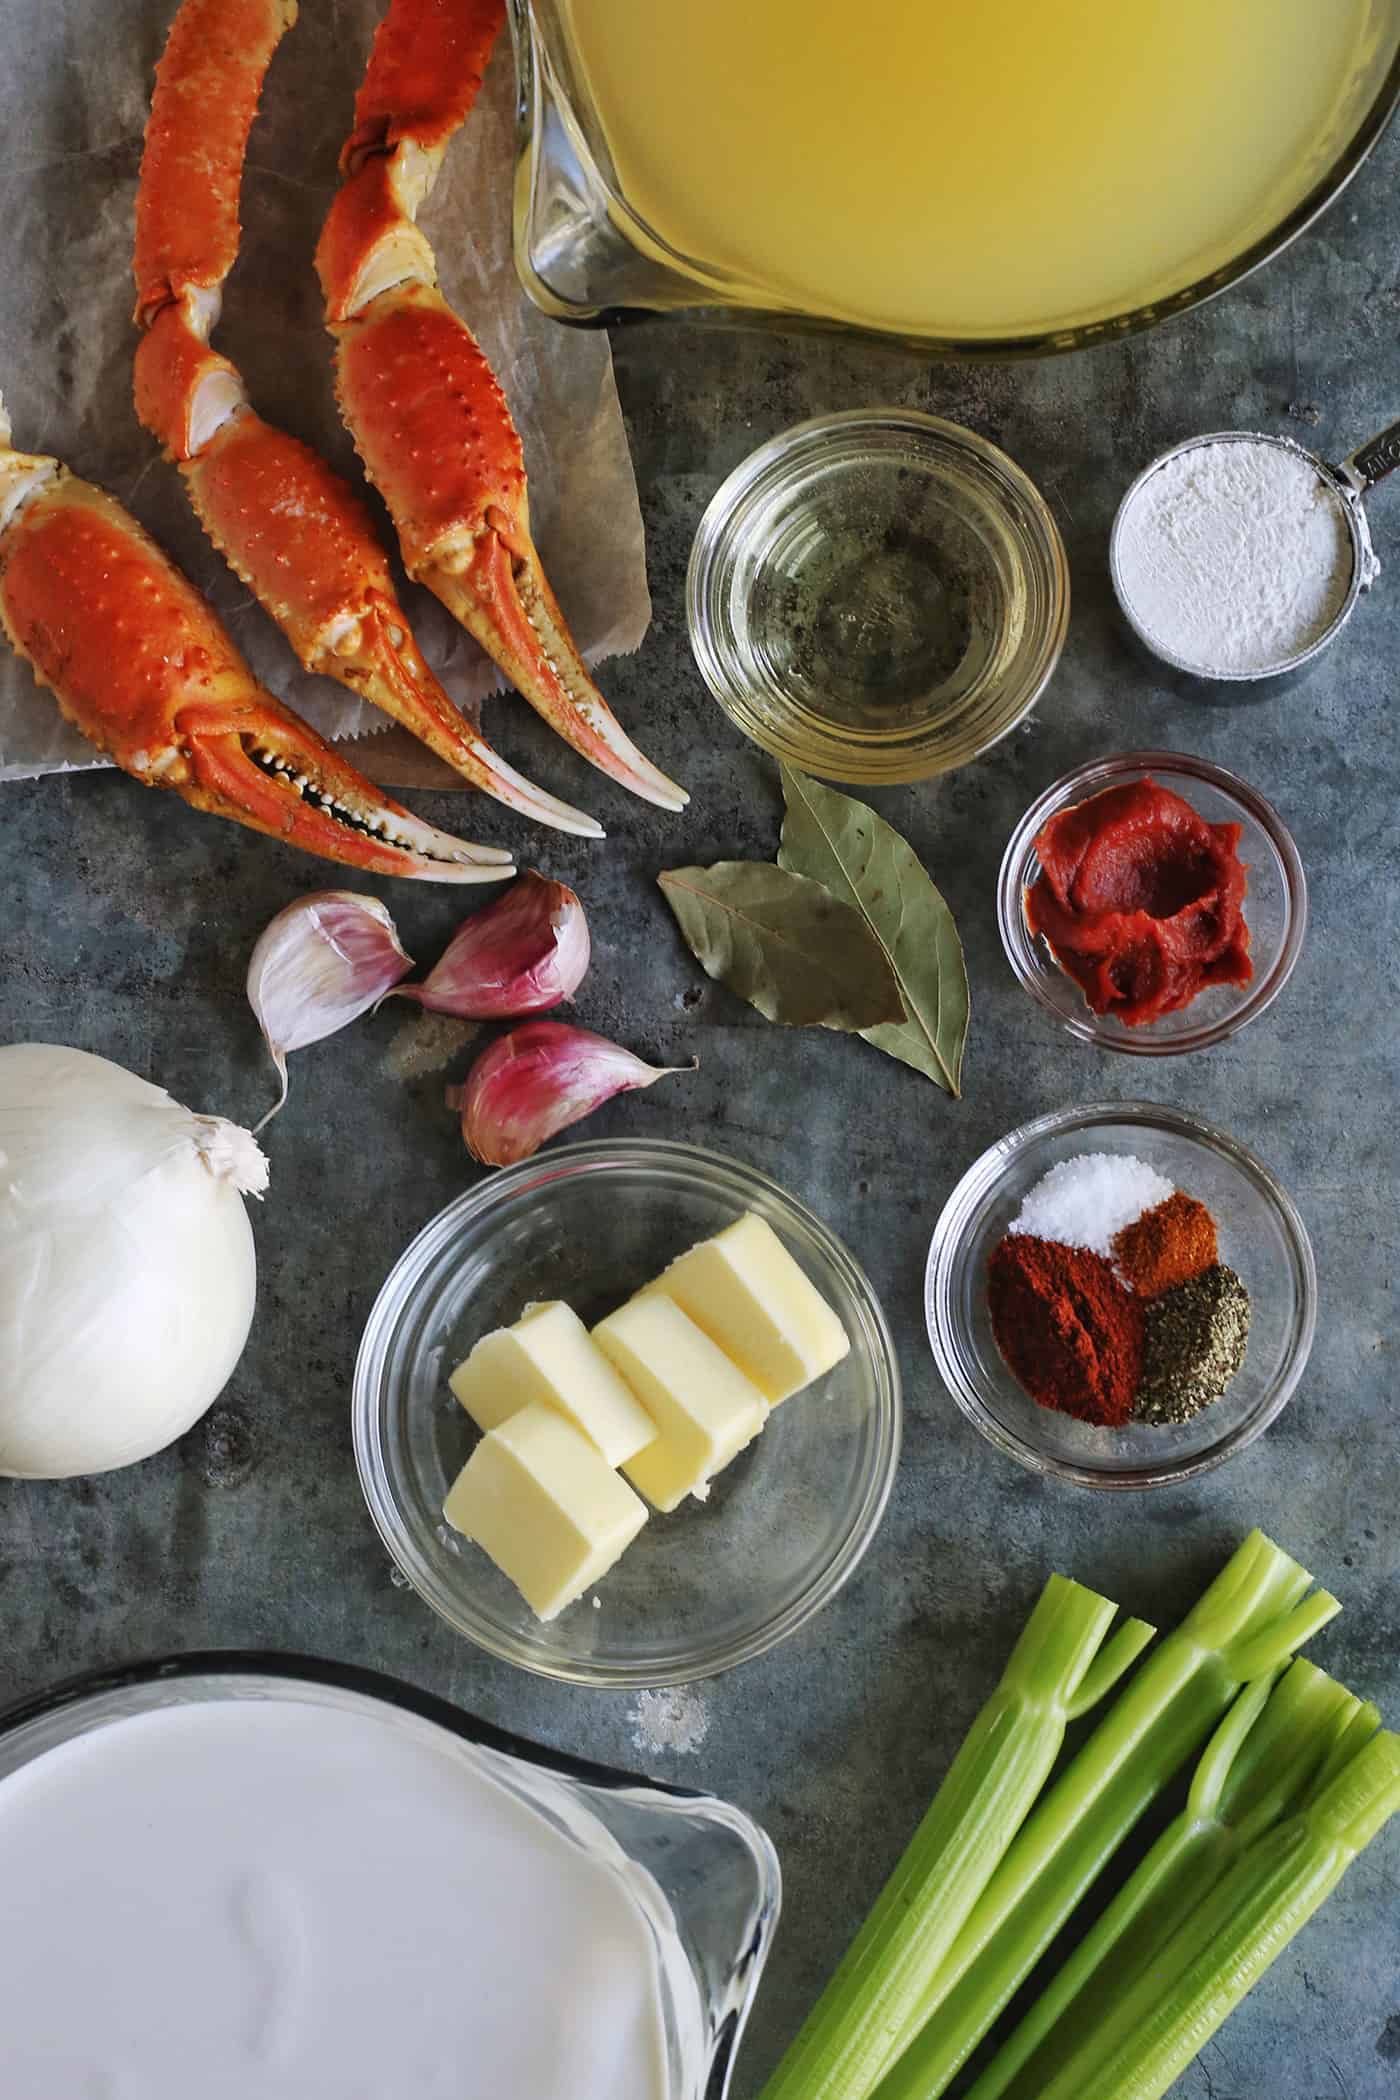 The ingredients needed to make crab bisque